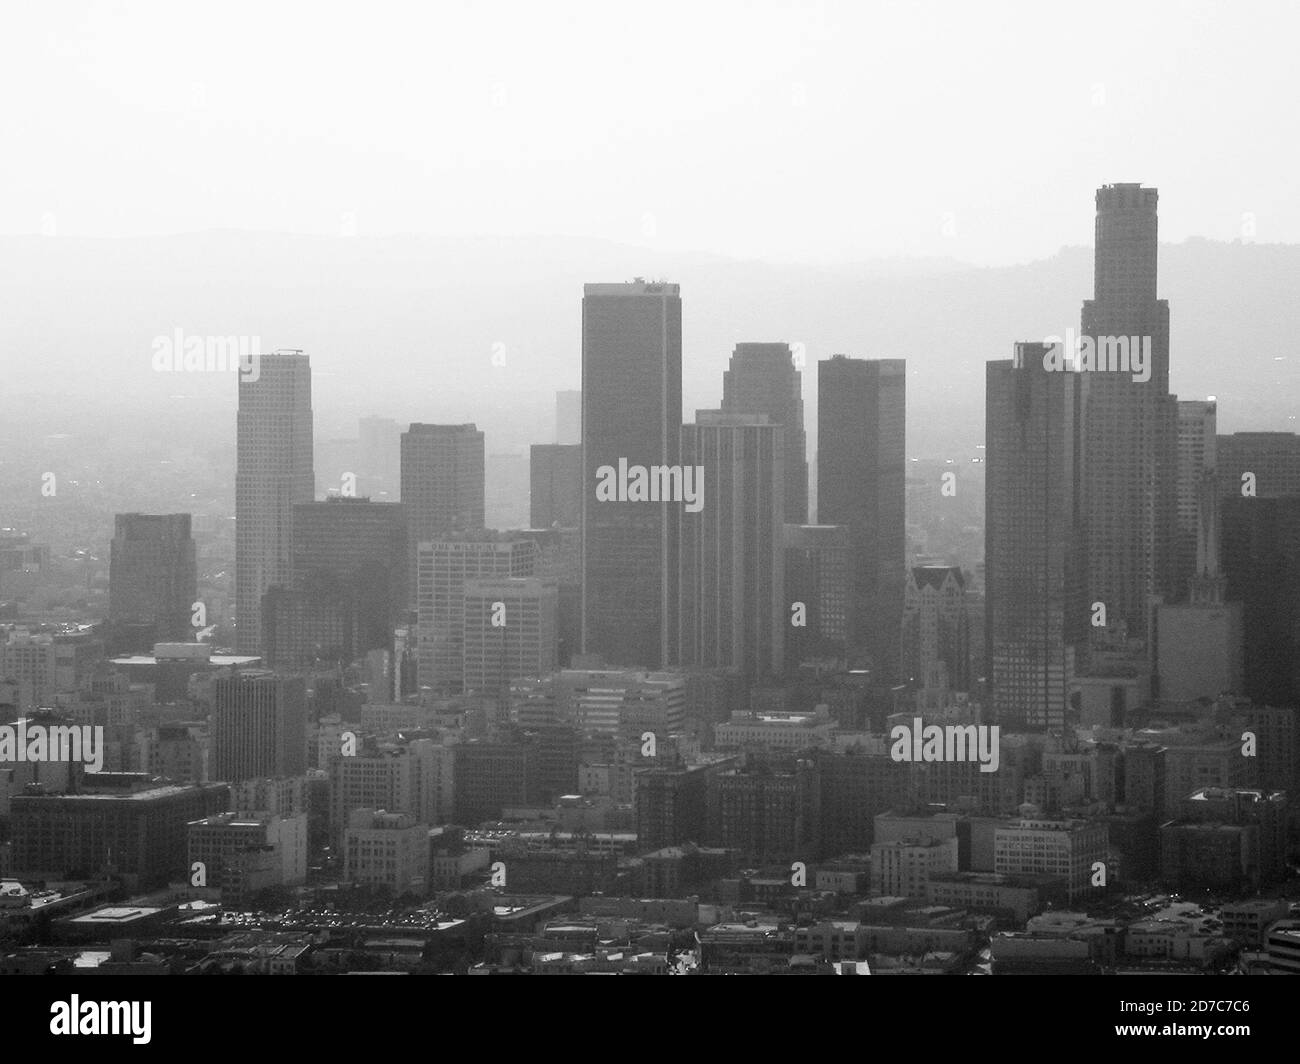 Los Angeles, California, USA - May 2004:  Archival black and white aerial view towers and thick smog in downtown LA. Stock Photo